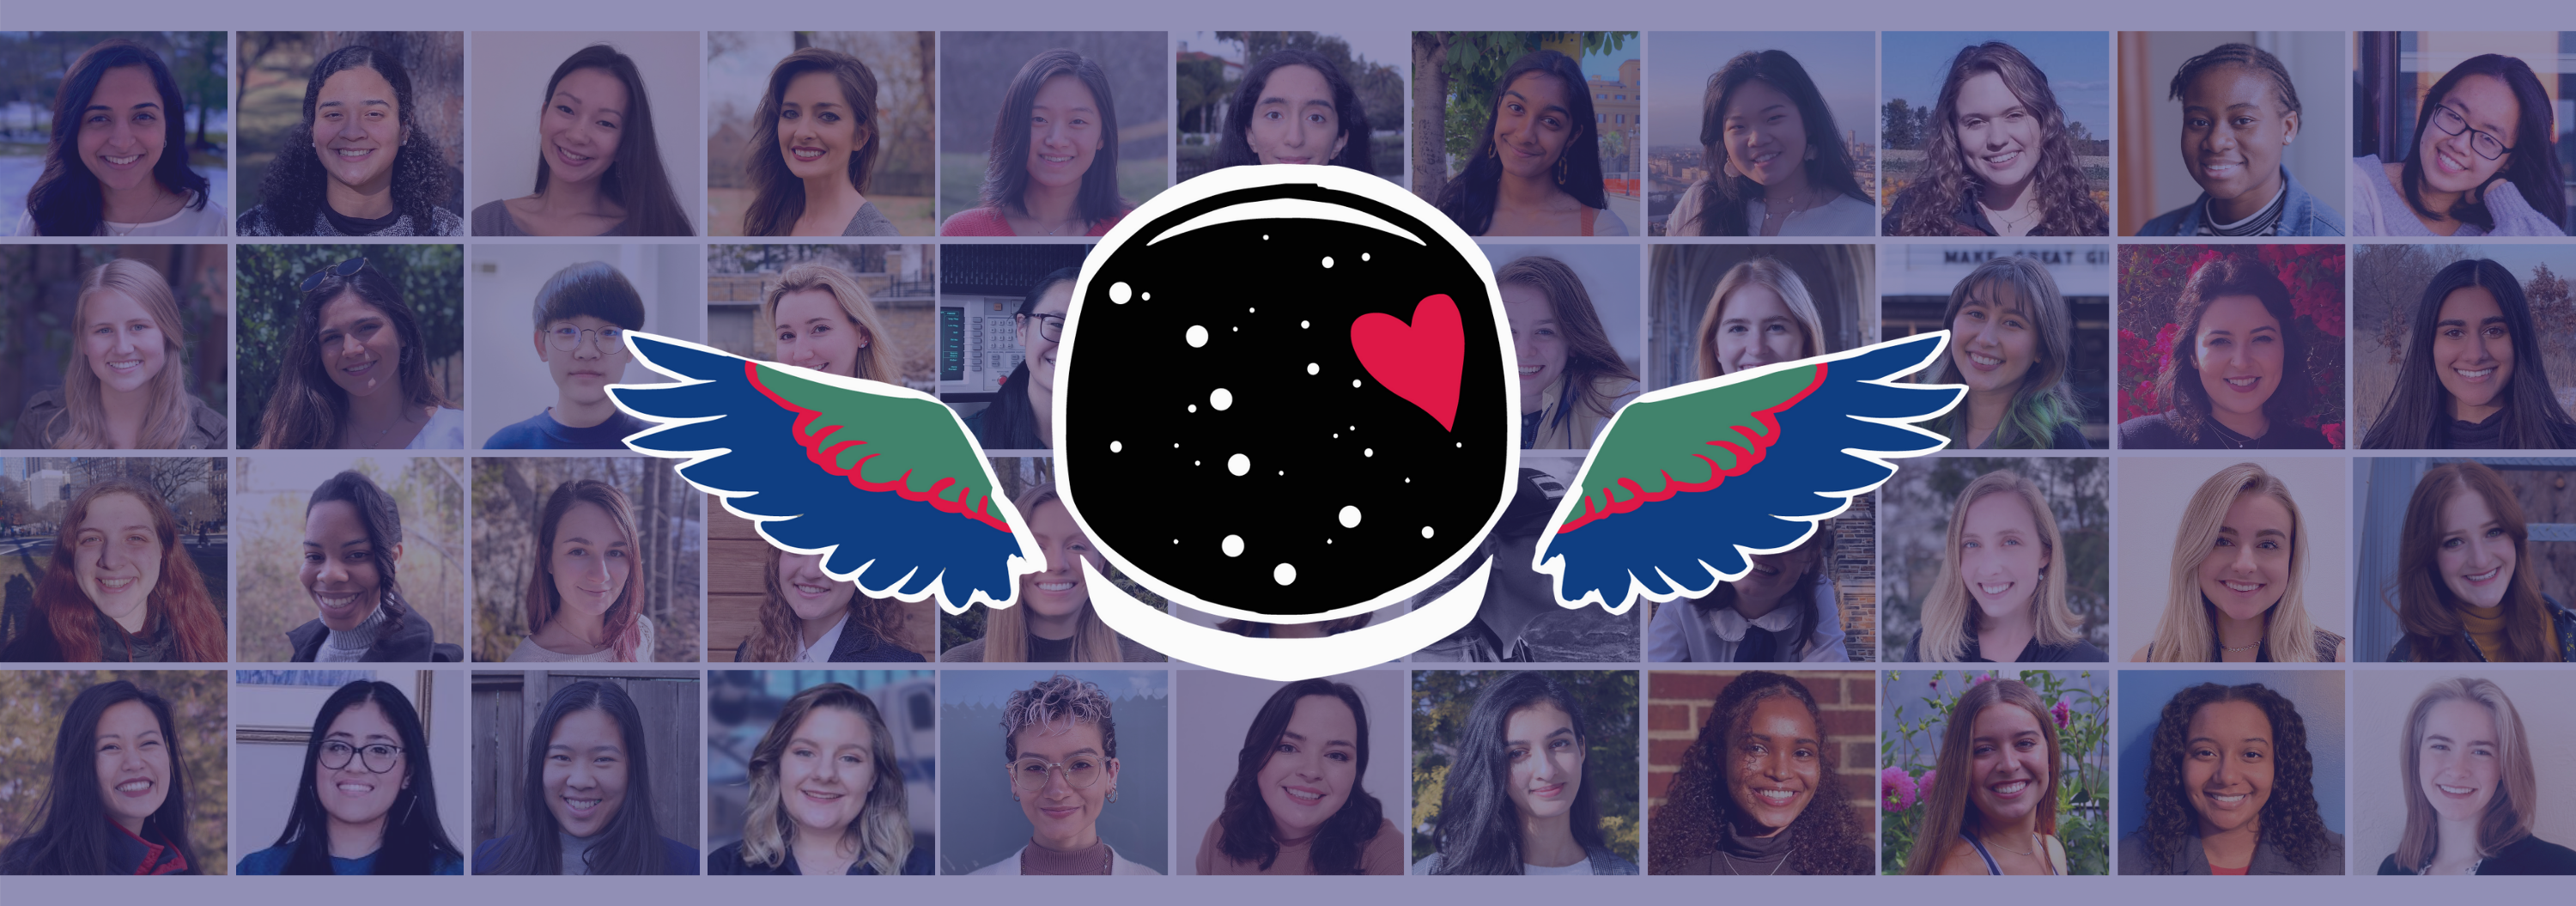 Brooke Owens Fellowship logo of an astronaut helmet with wings, on a background of a collage of photos of women.